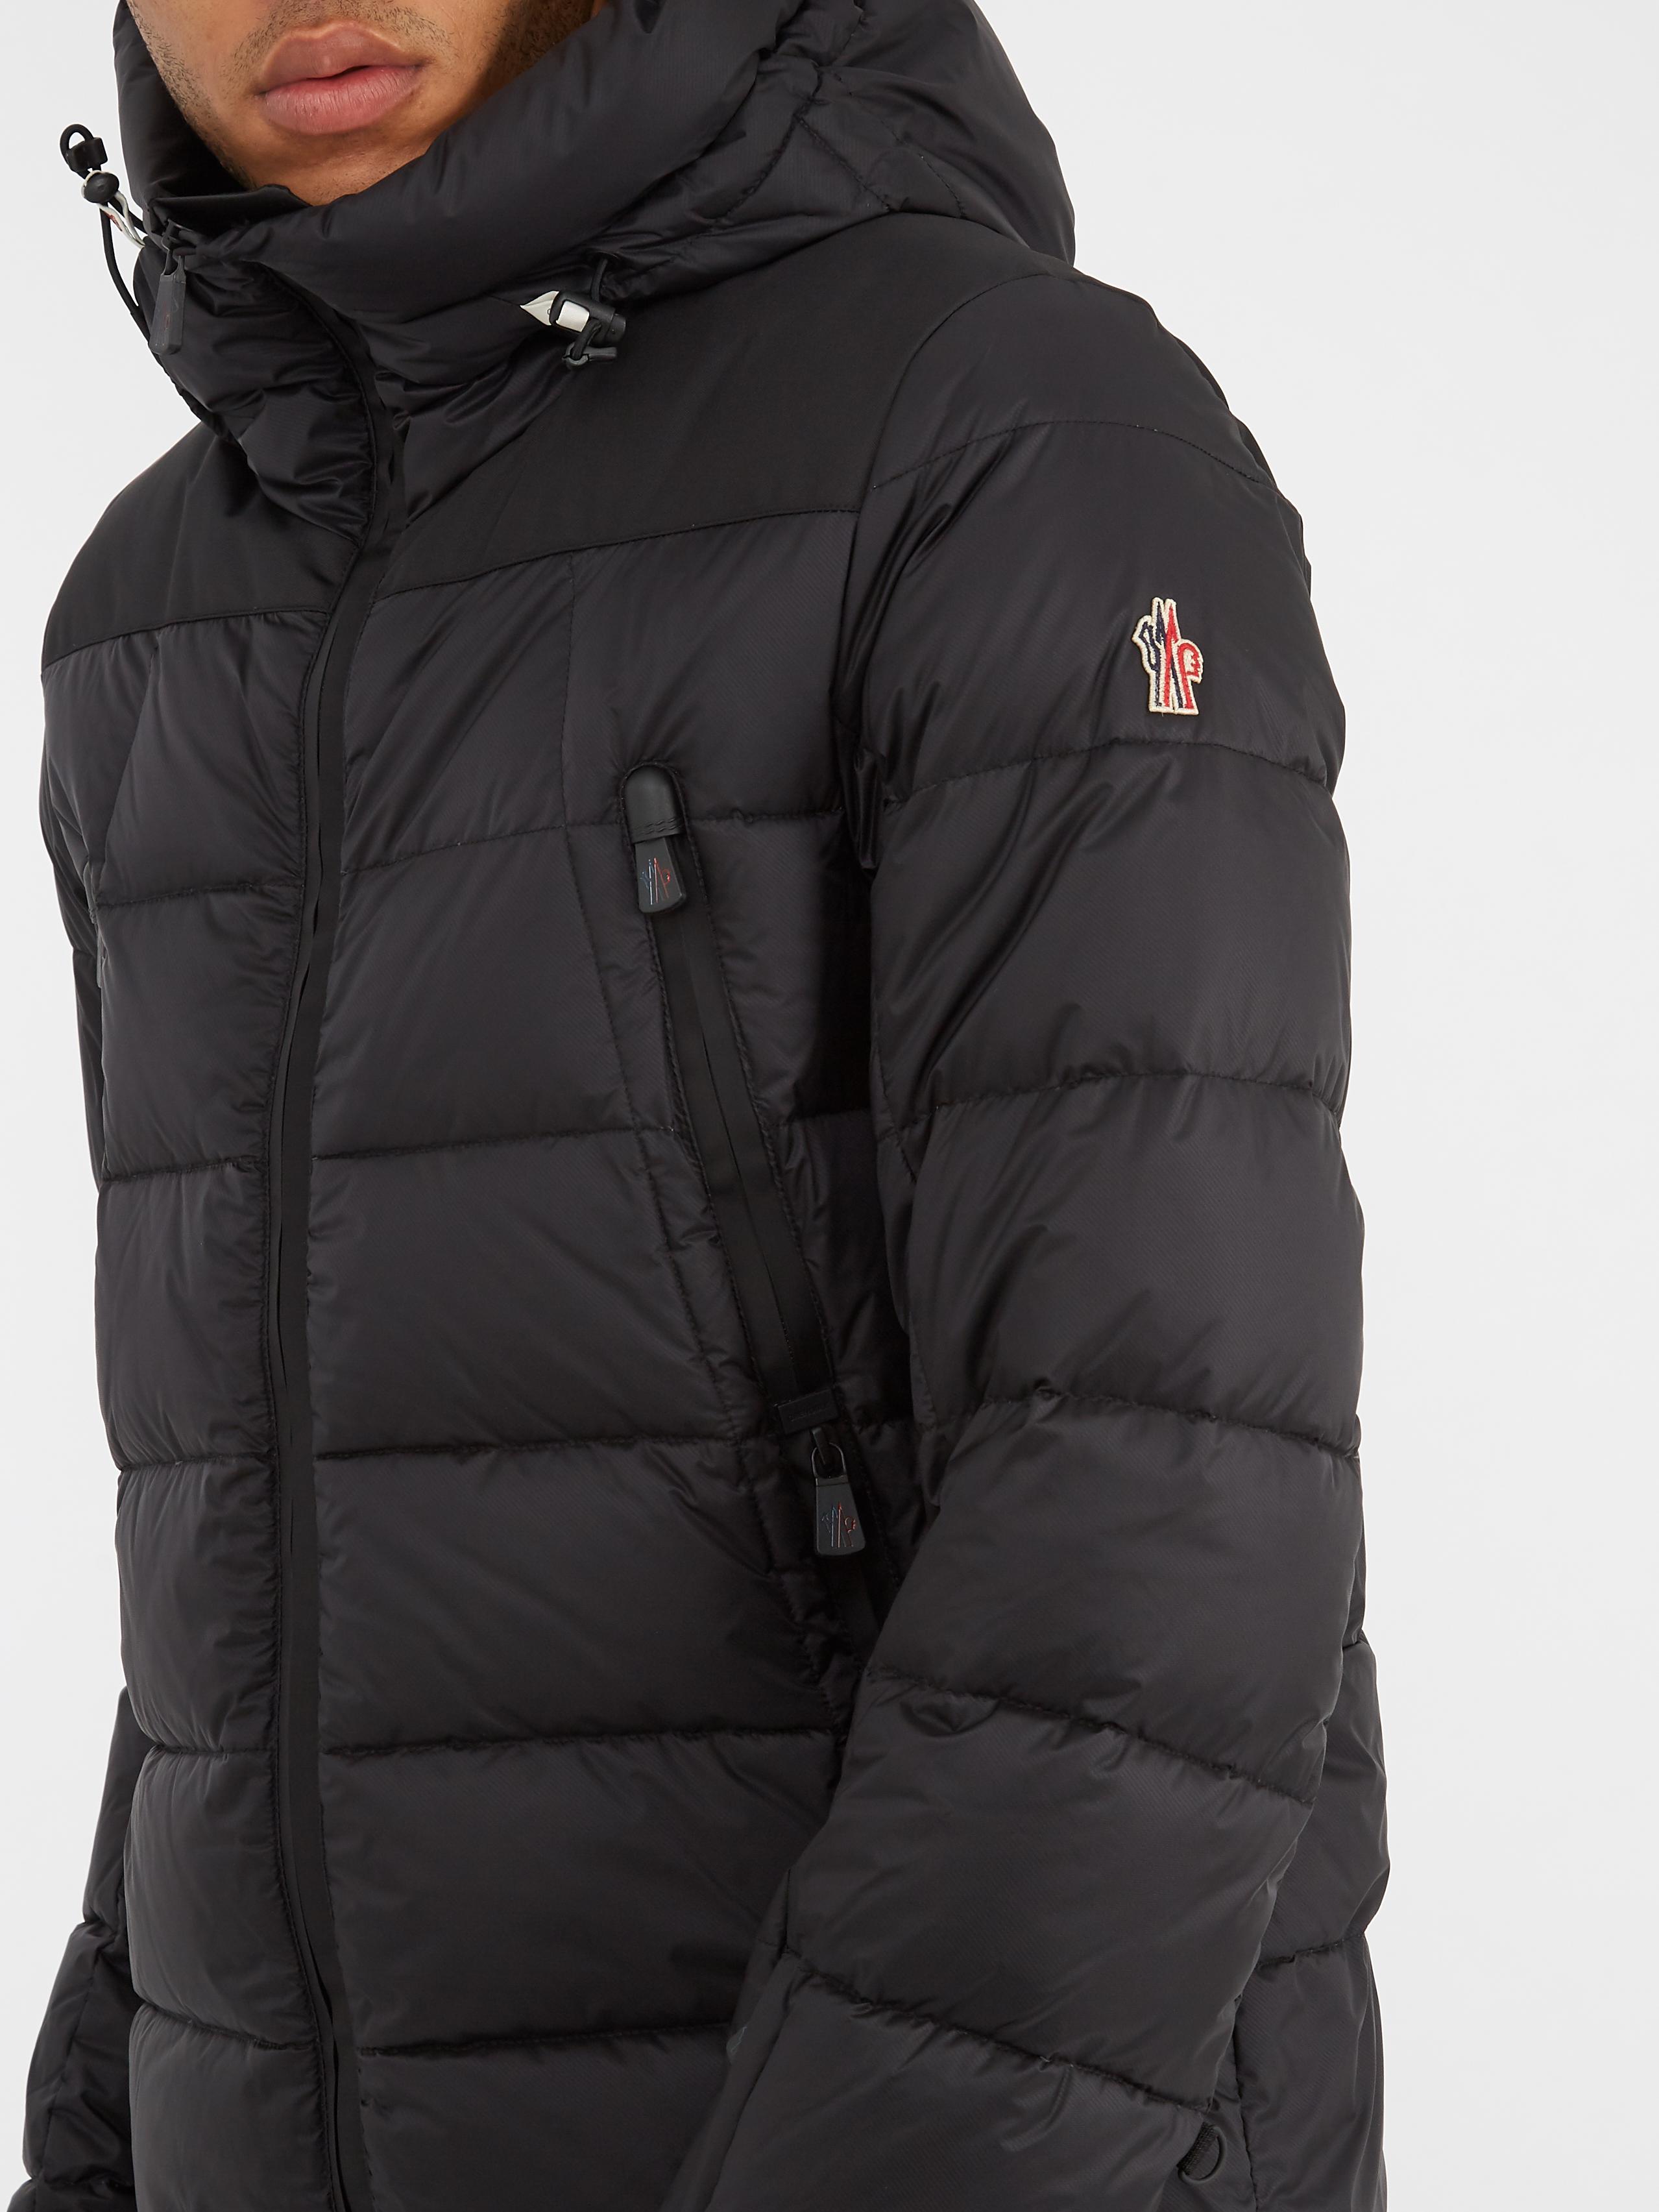 Moncler Grenoble Jacket Discount Sale, UP TO 60% OFF | www 